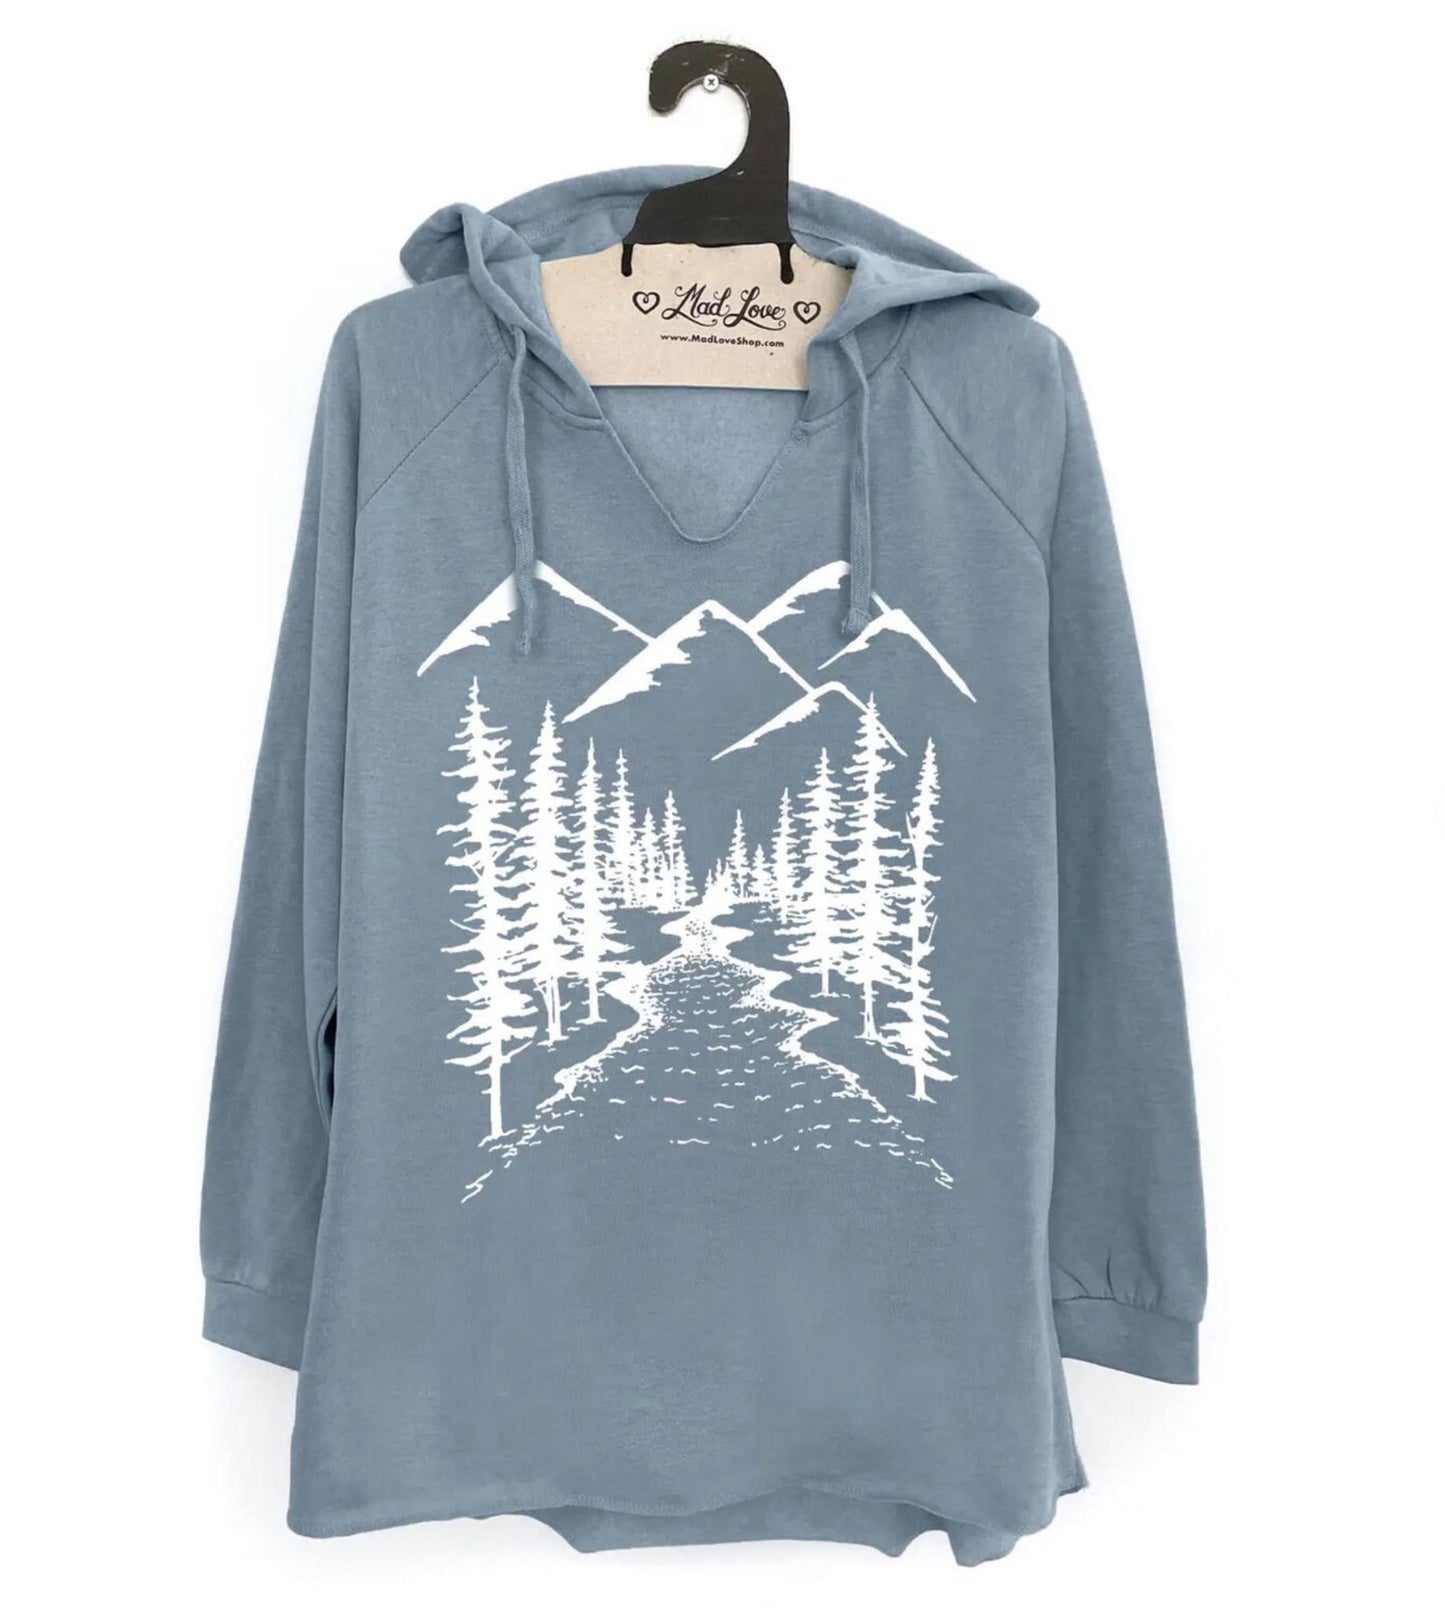 Mad Love Heather Blue Hooded V-Notch Sweatshirt with Mountains - size Large